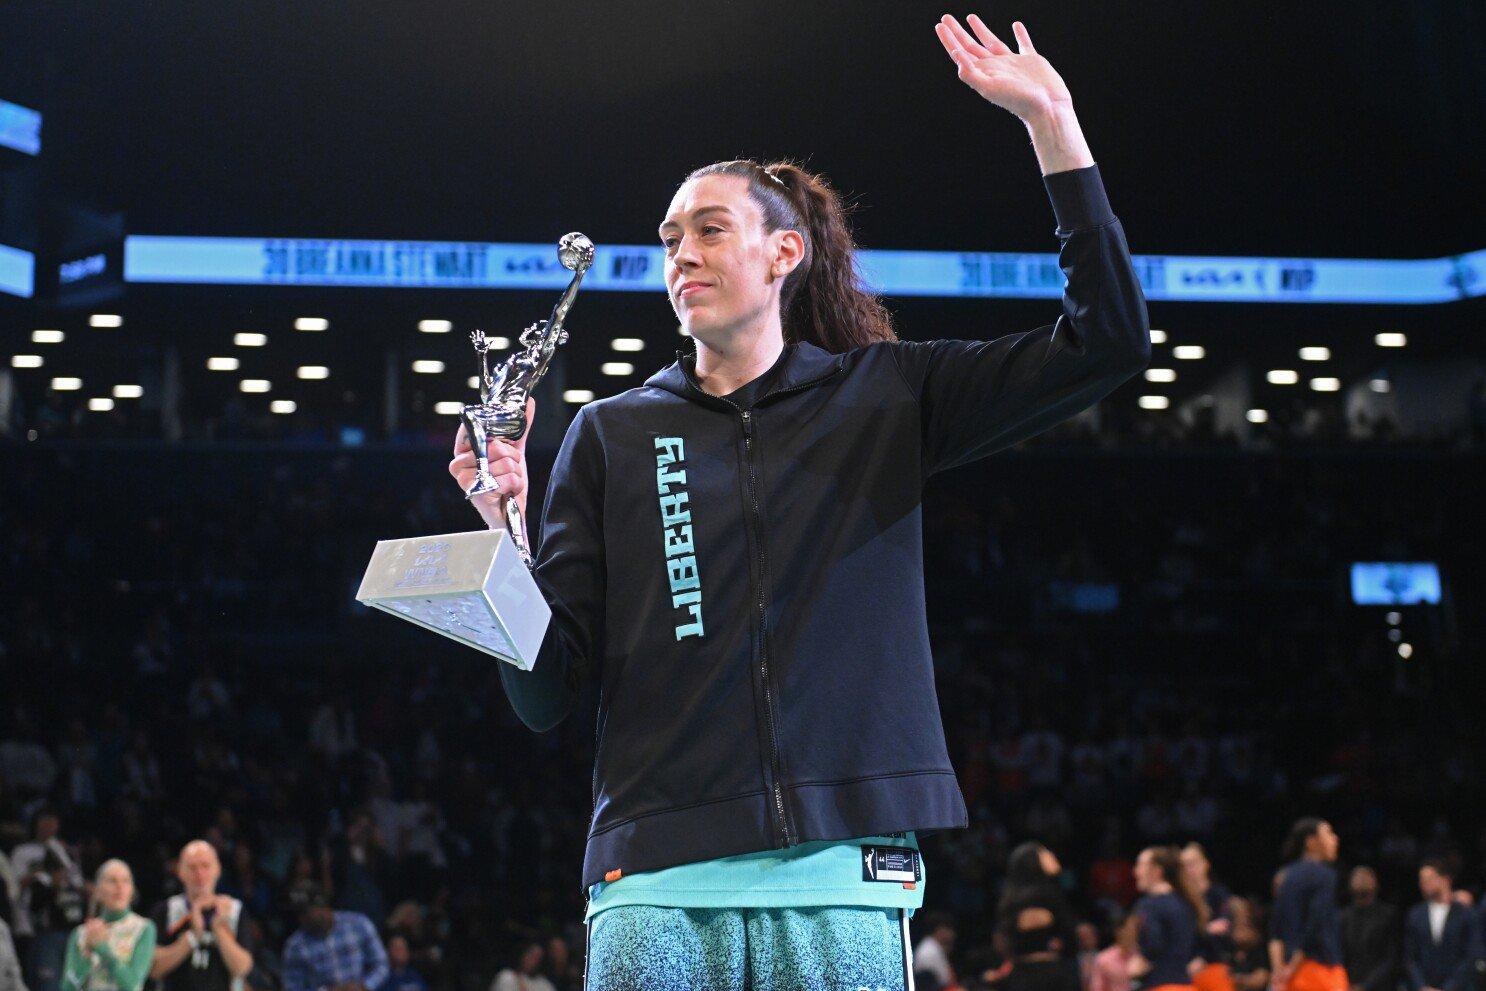 Breanna Stewart named the 2023 WNBA League MVP in her 1st year with the New York Liberty